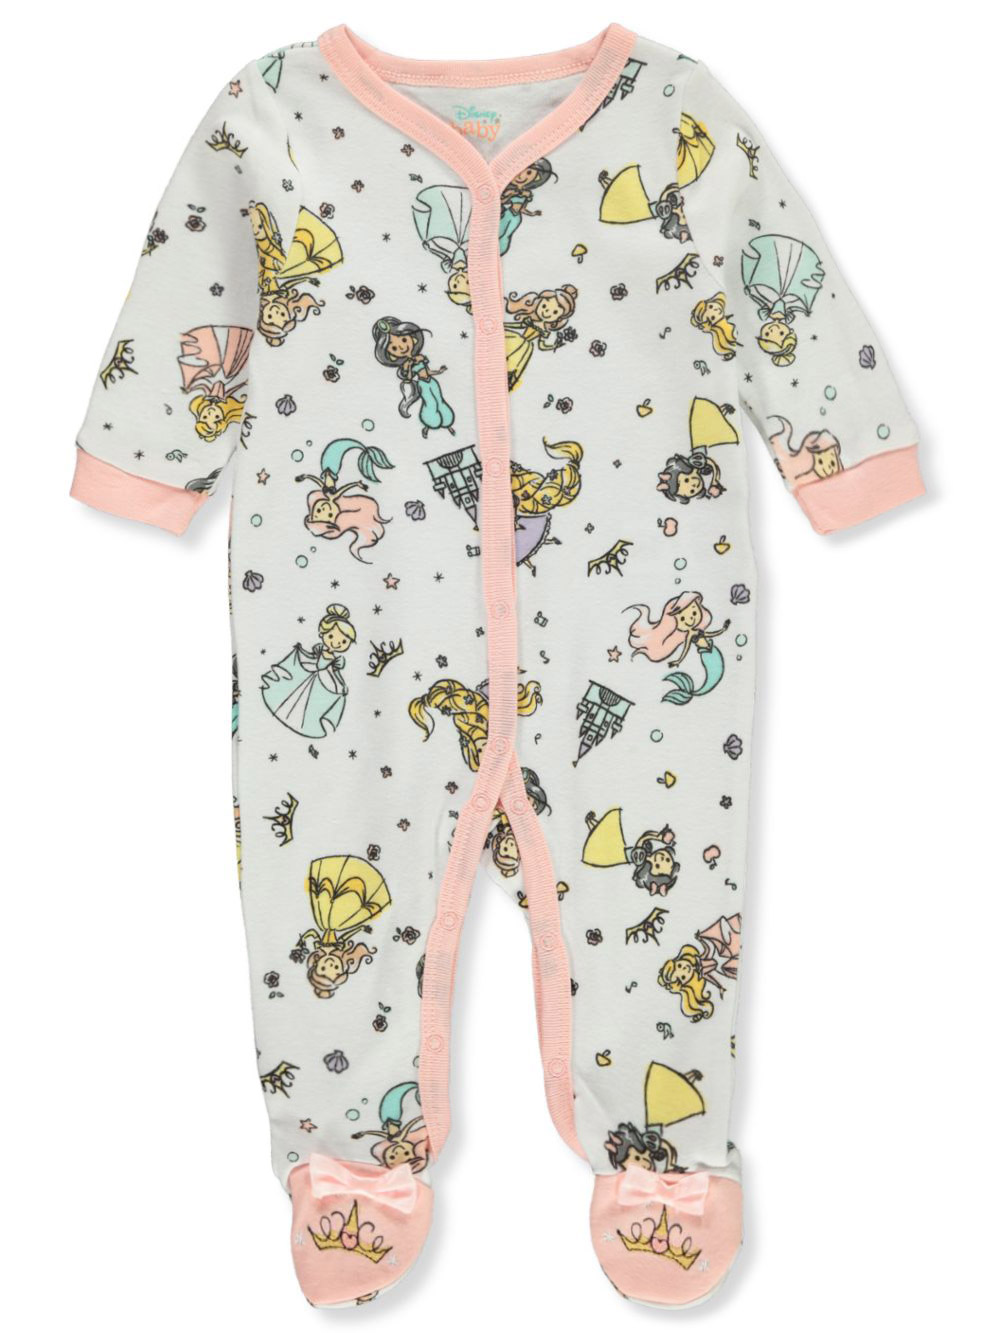 Disney Princess Baby Girls' Footed Coveralls